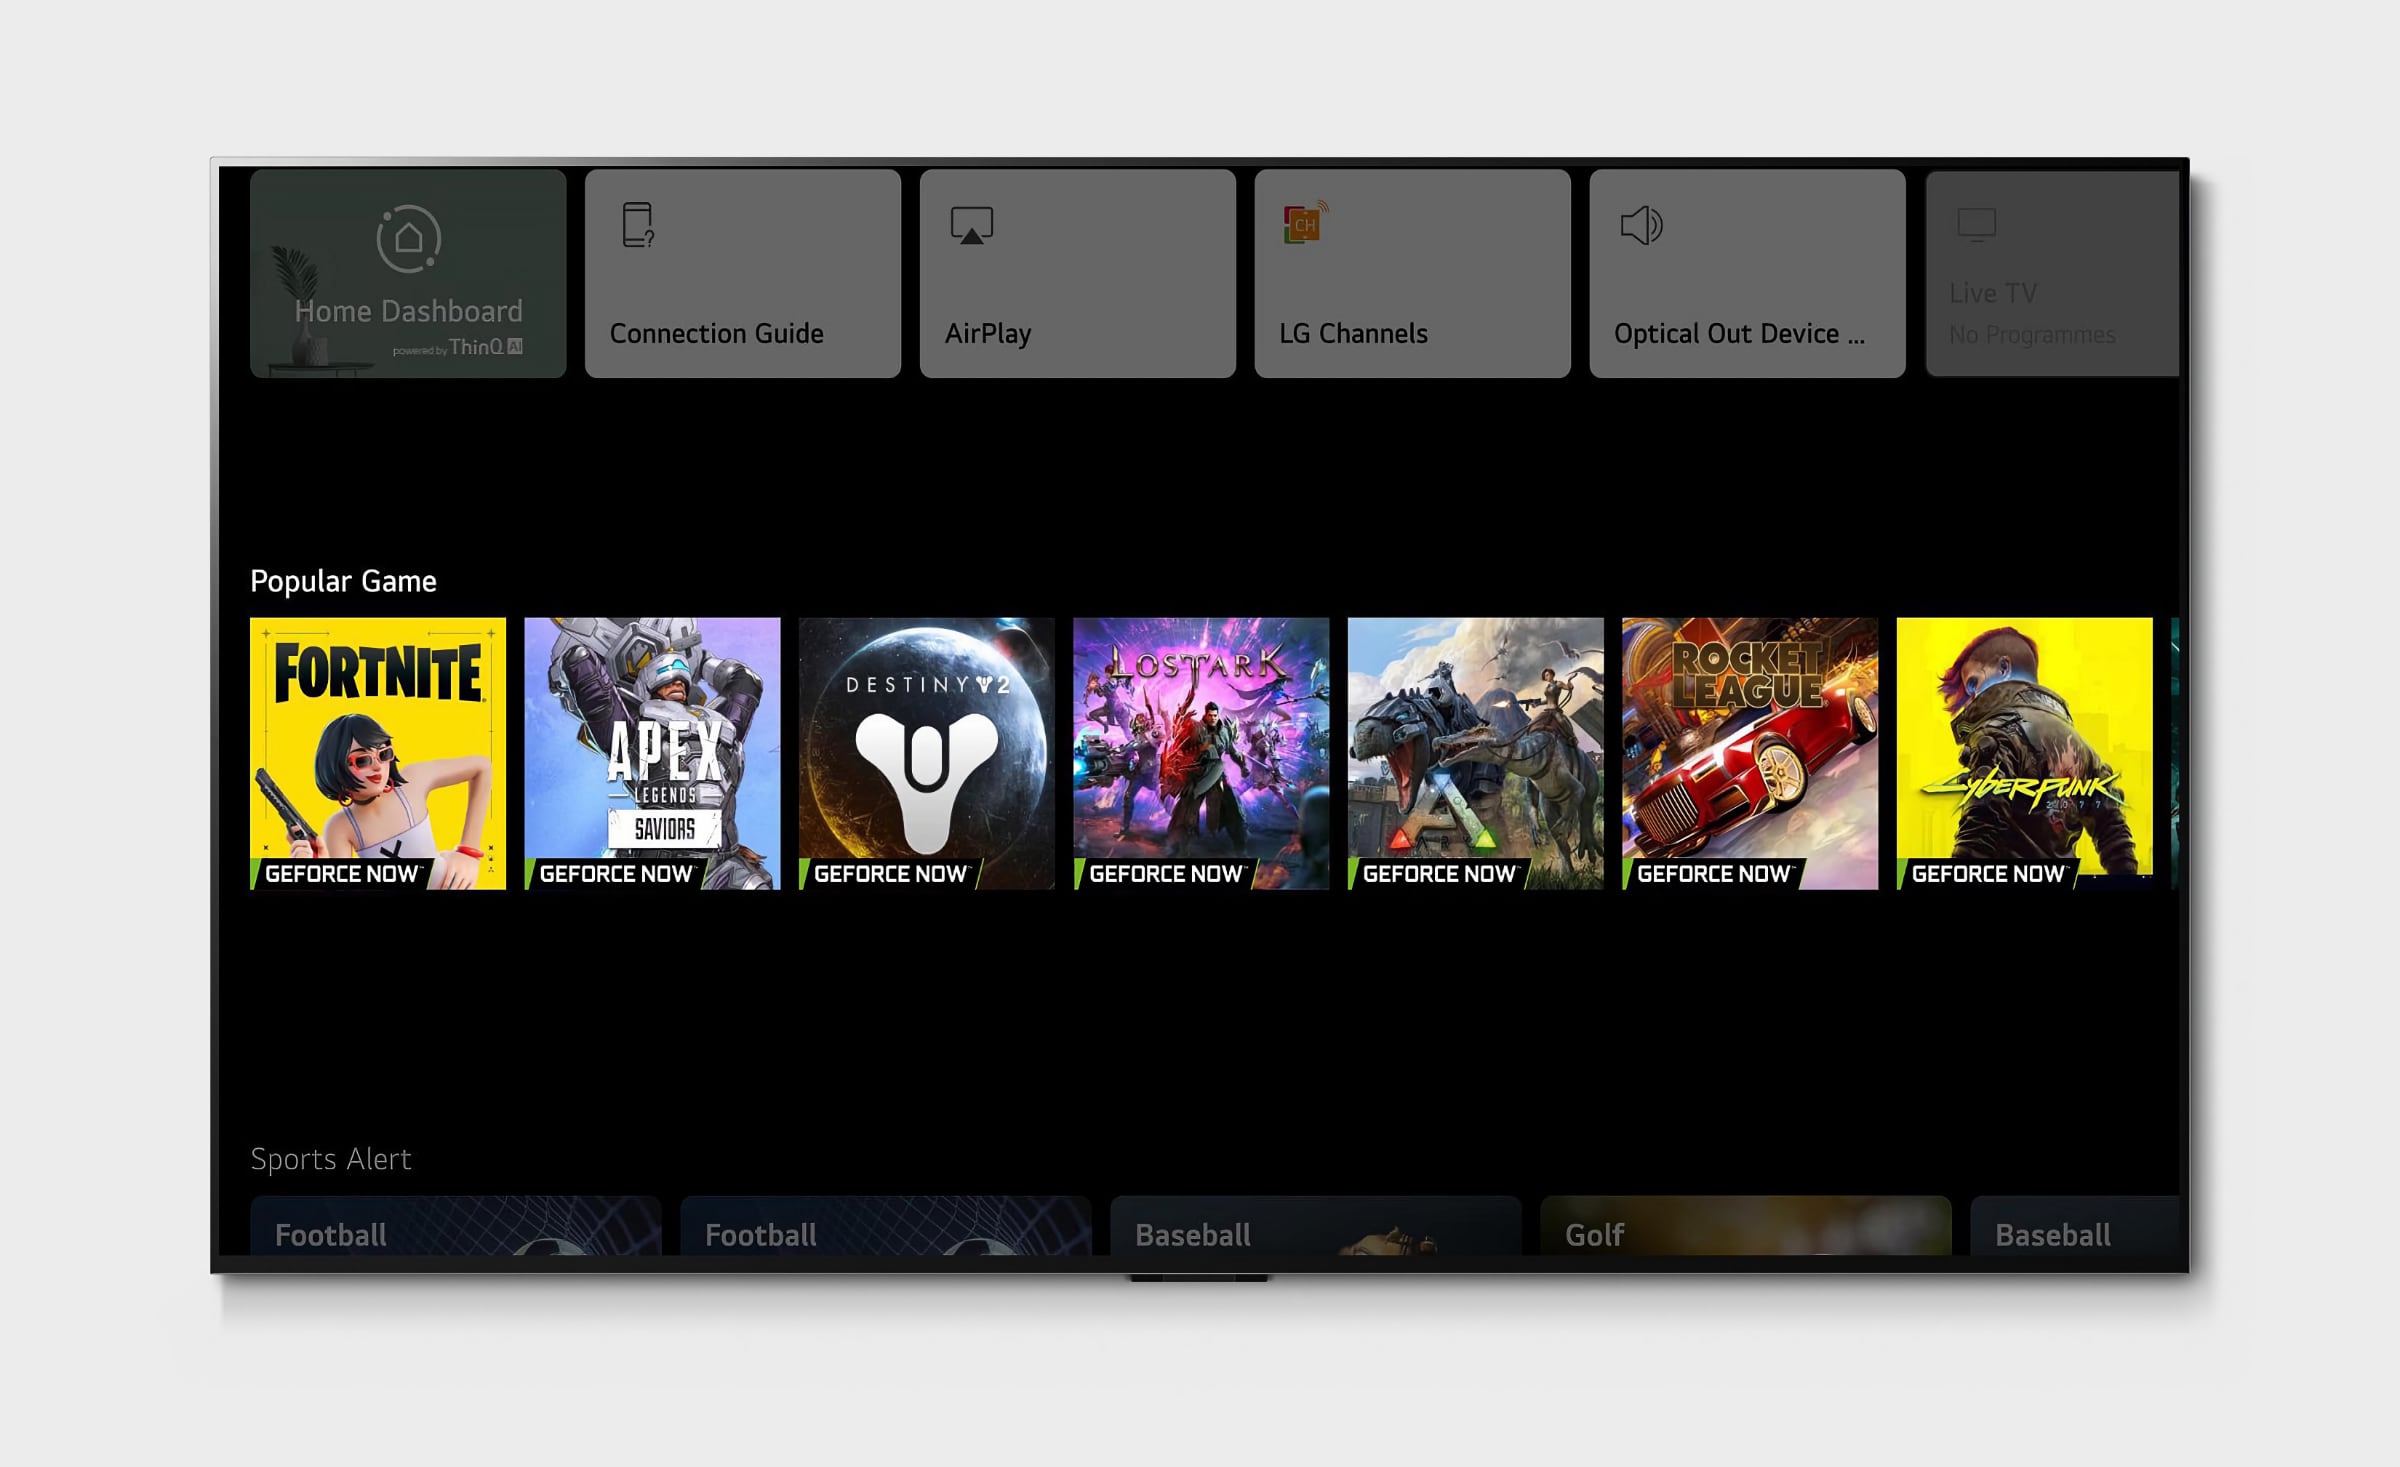 XBOX CLOUD GAMING on LG TVs!!! WE TESTED AND IT WORKS!! 